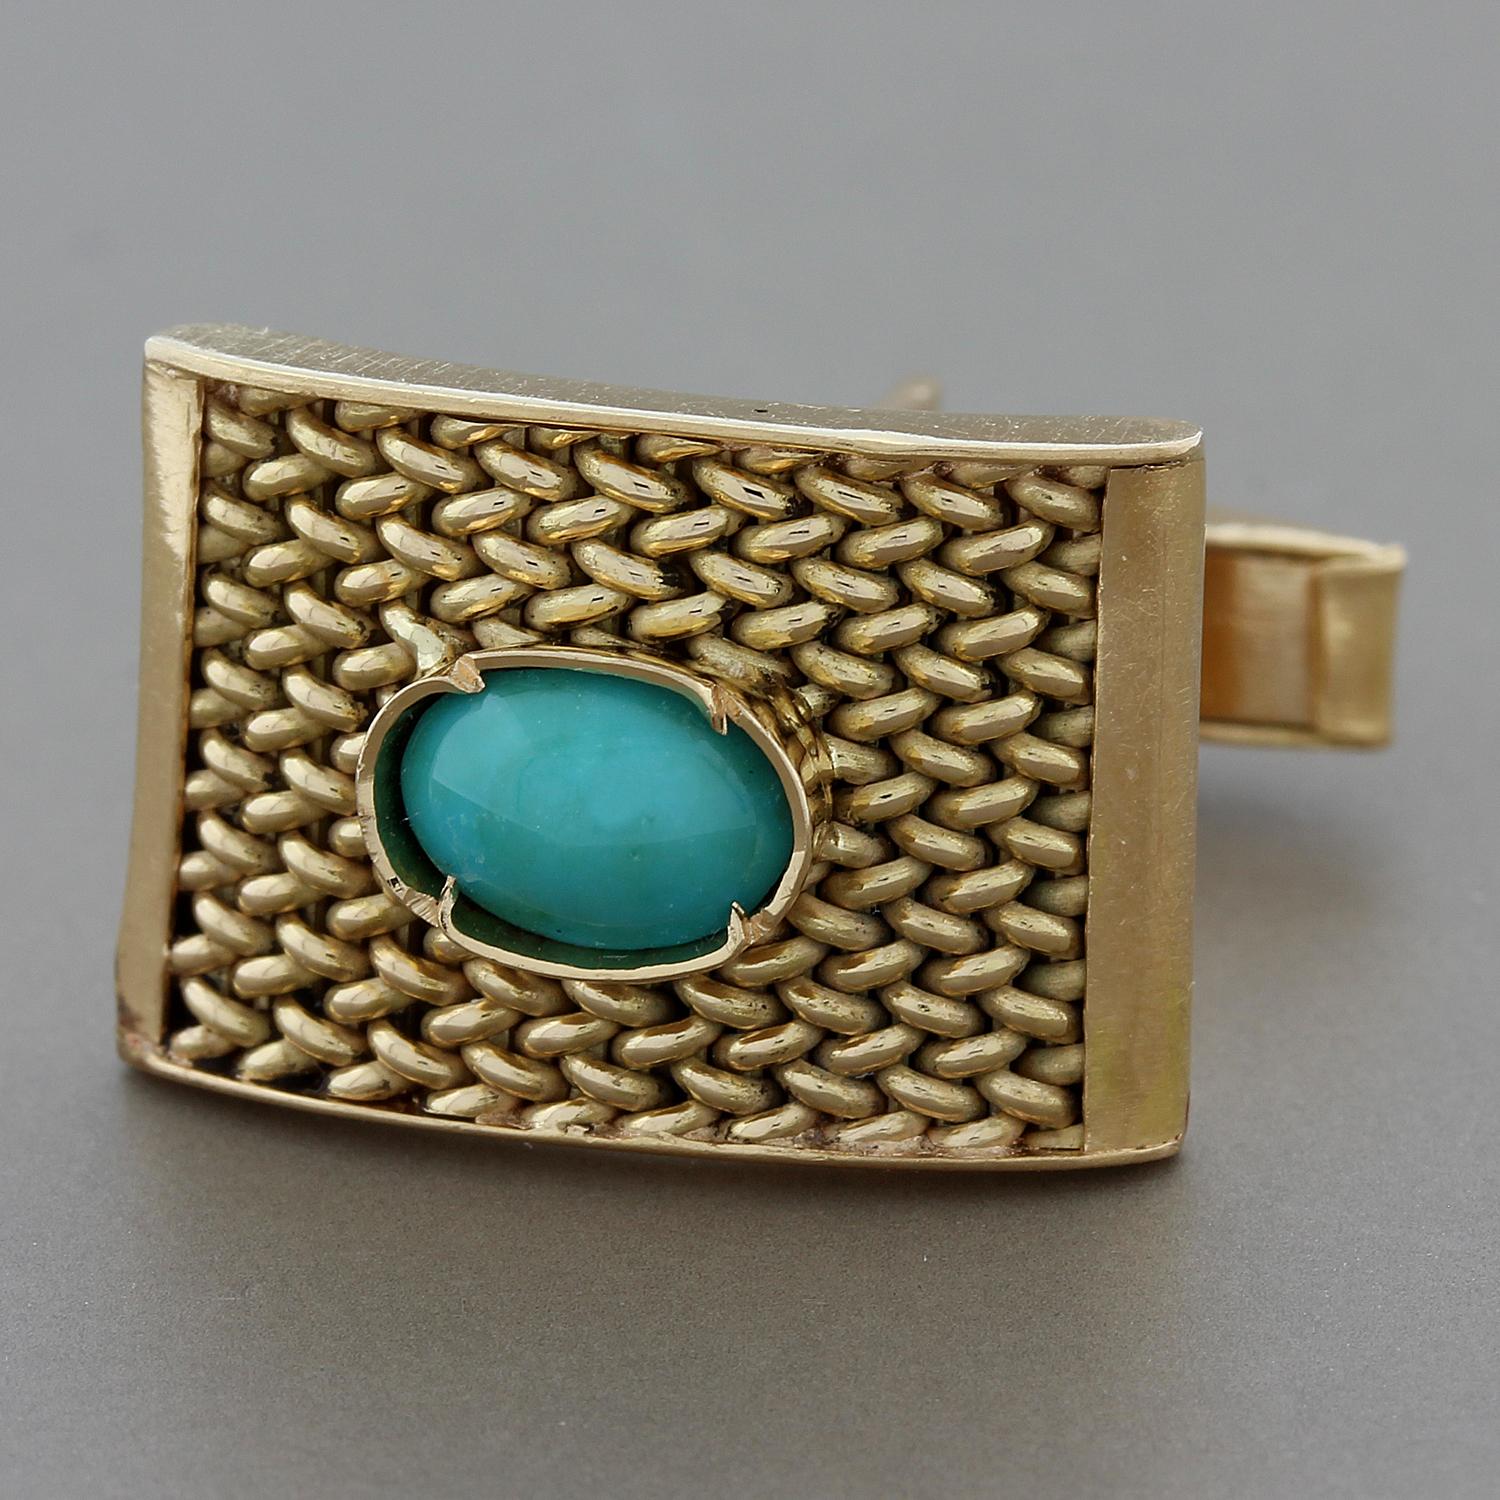 This pair of estate cufflinks feature an oval cut turquoise in a bezel setting in the center of the 14K yellow gold setting. The convex setting details intricate handwork of weaved gold.